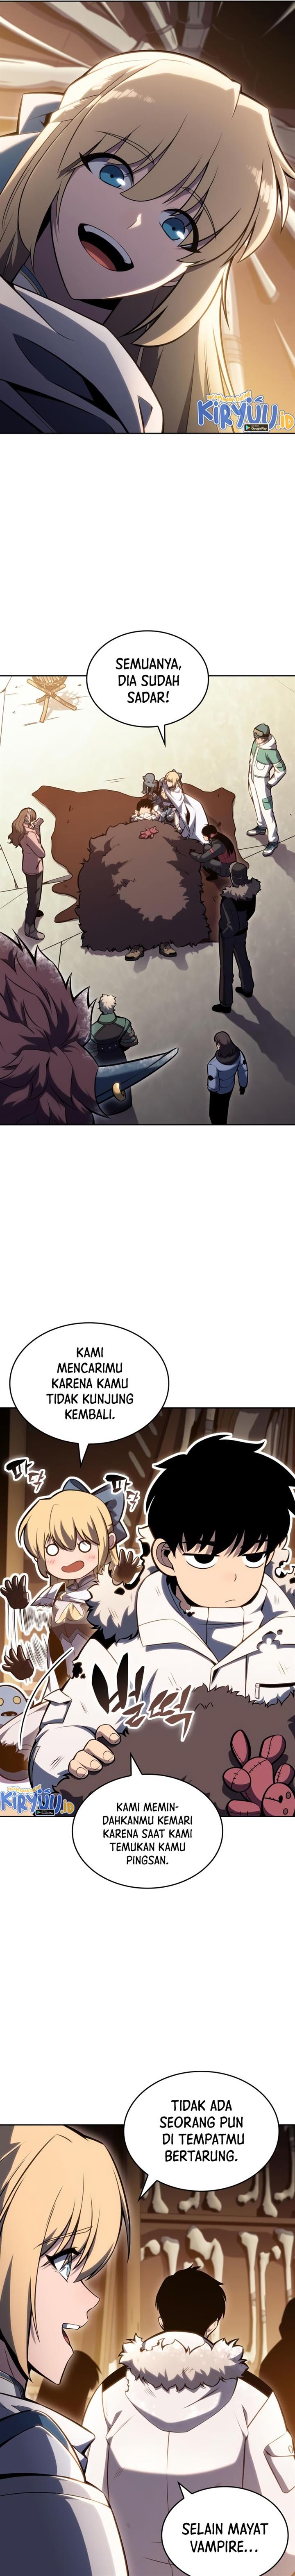 Solo Max-Level Newbie Chapter 95